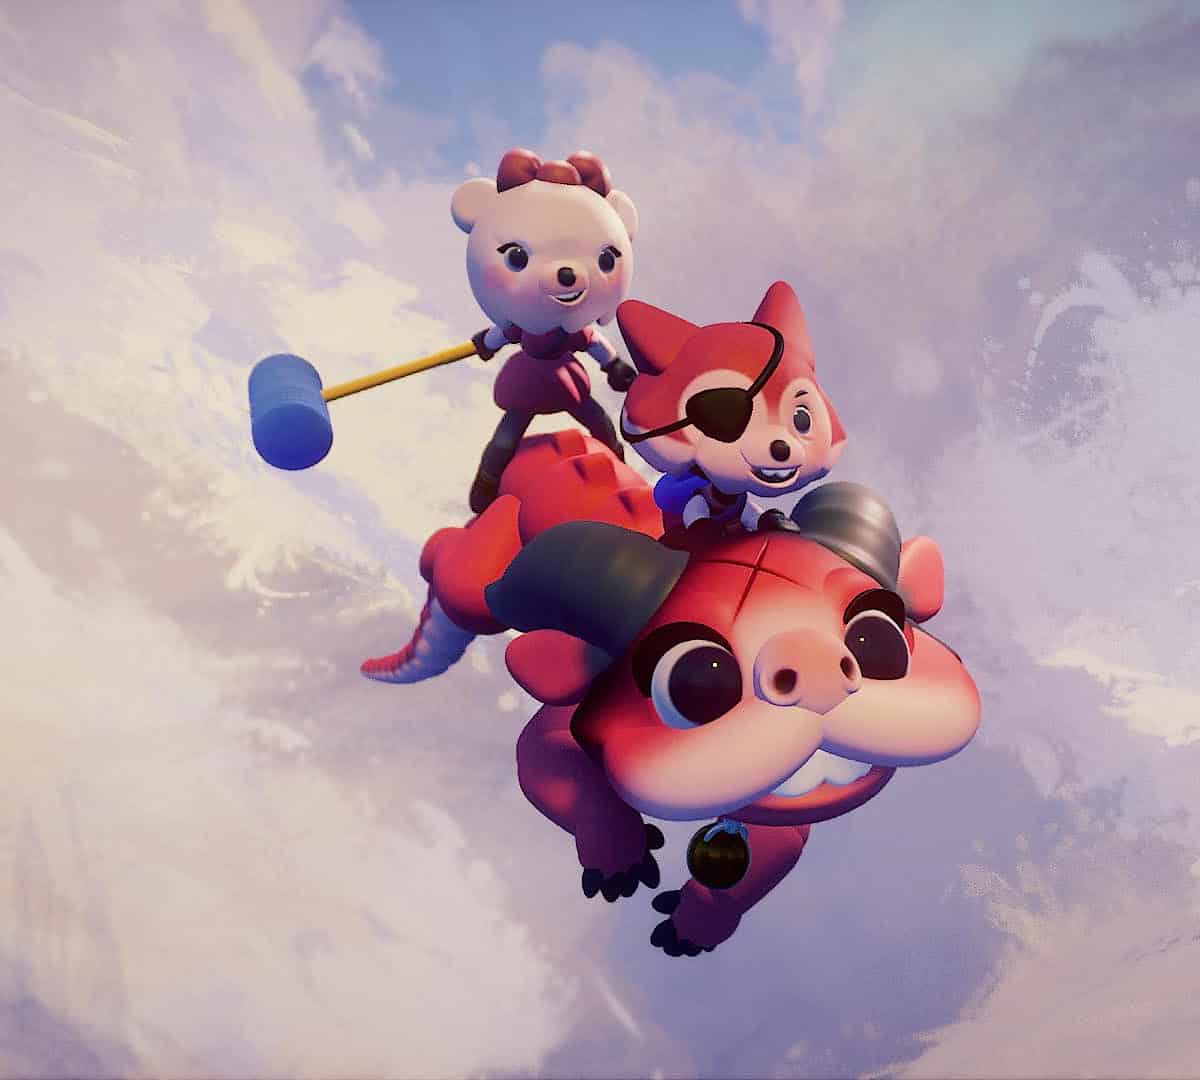 Dreams screenshot - three creatures flying in clouds